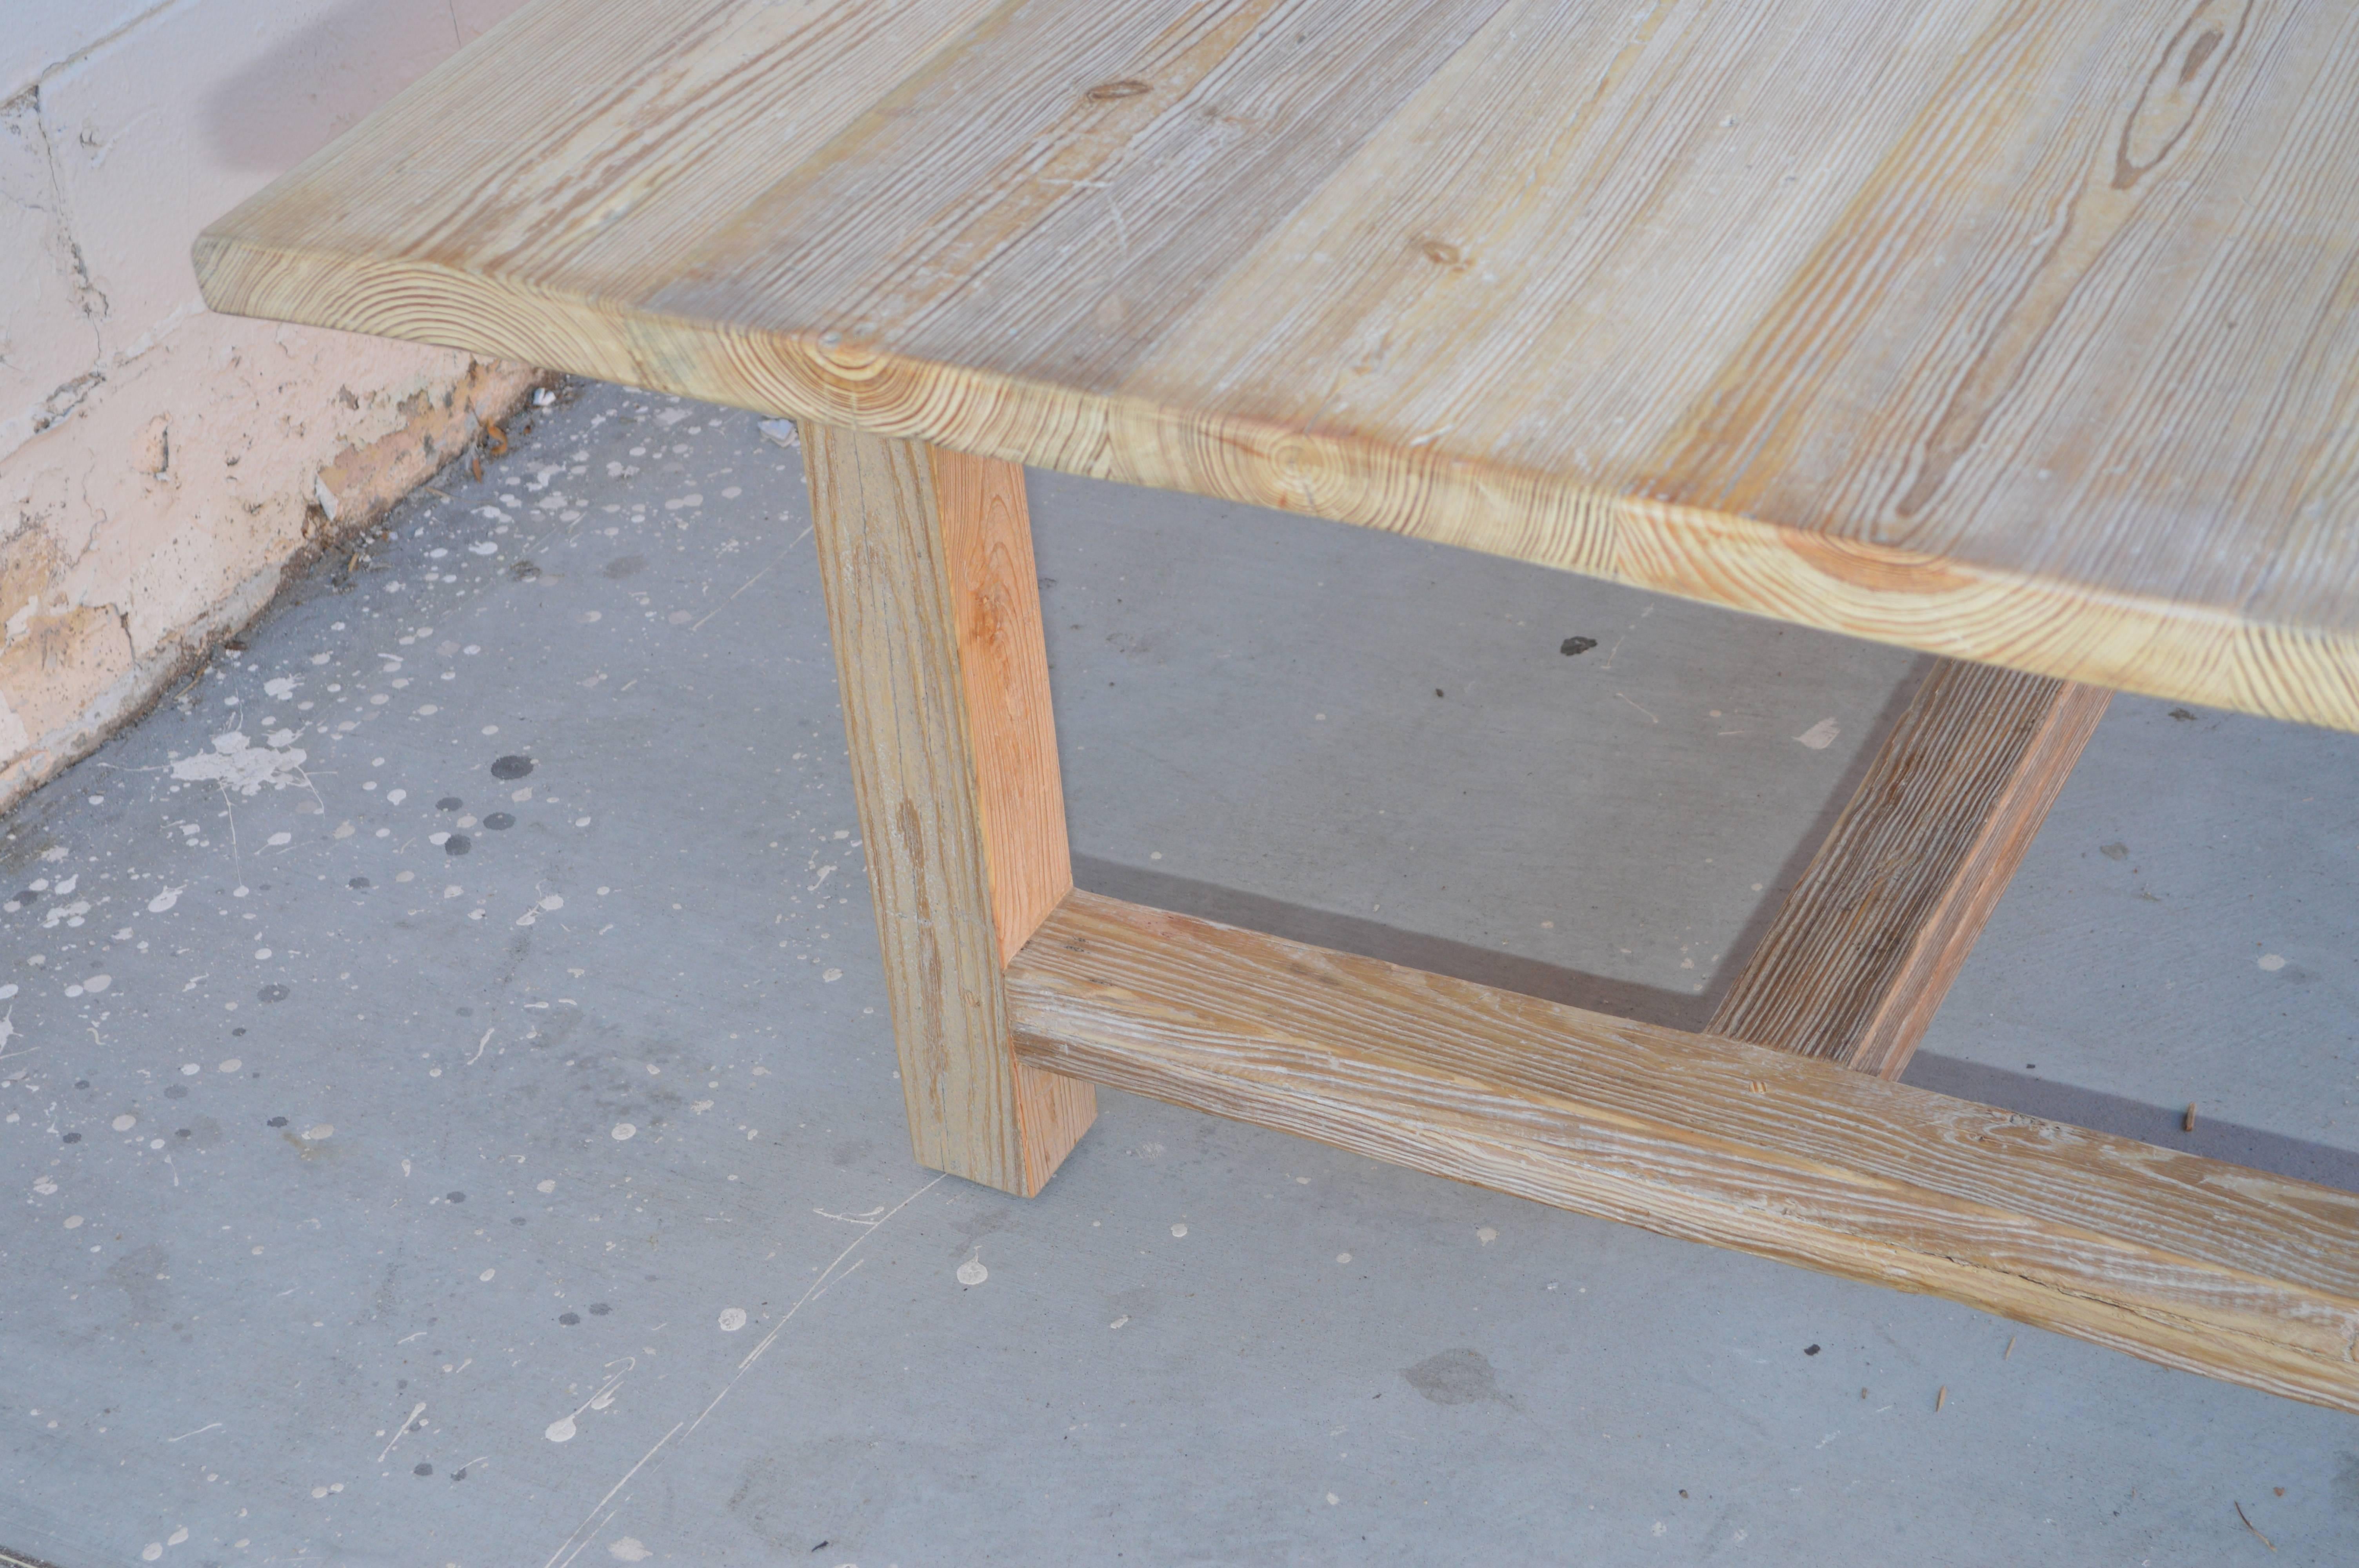 Contemporary Vintage Pine Farm or Harvest Table, Sun Bleached and Weathered 